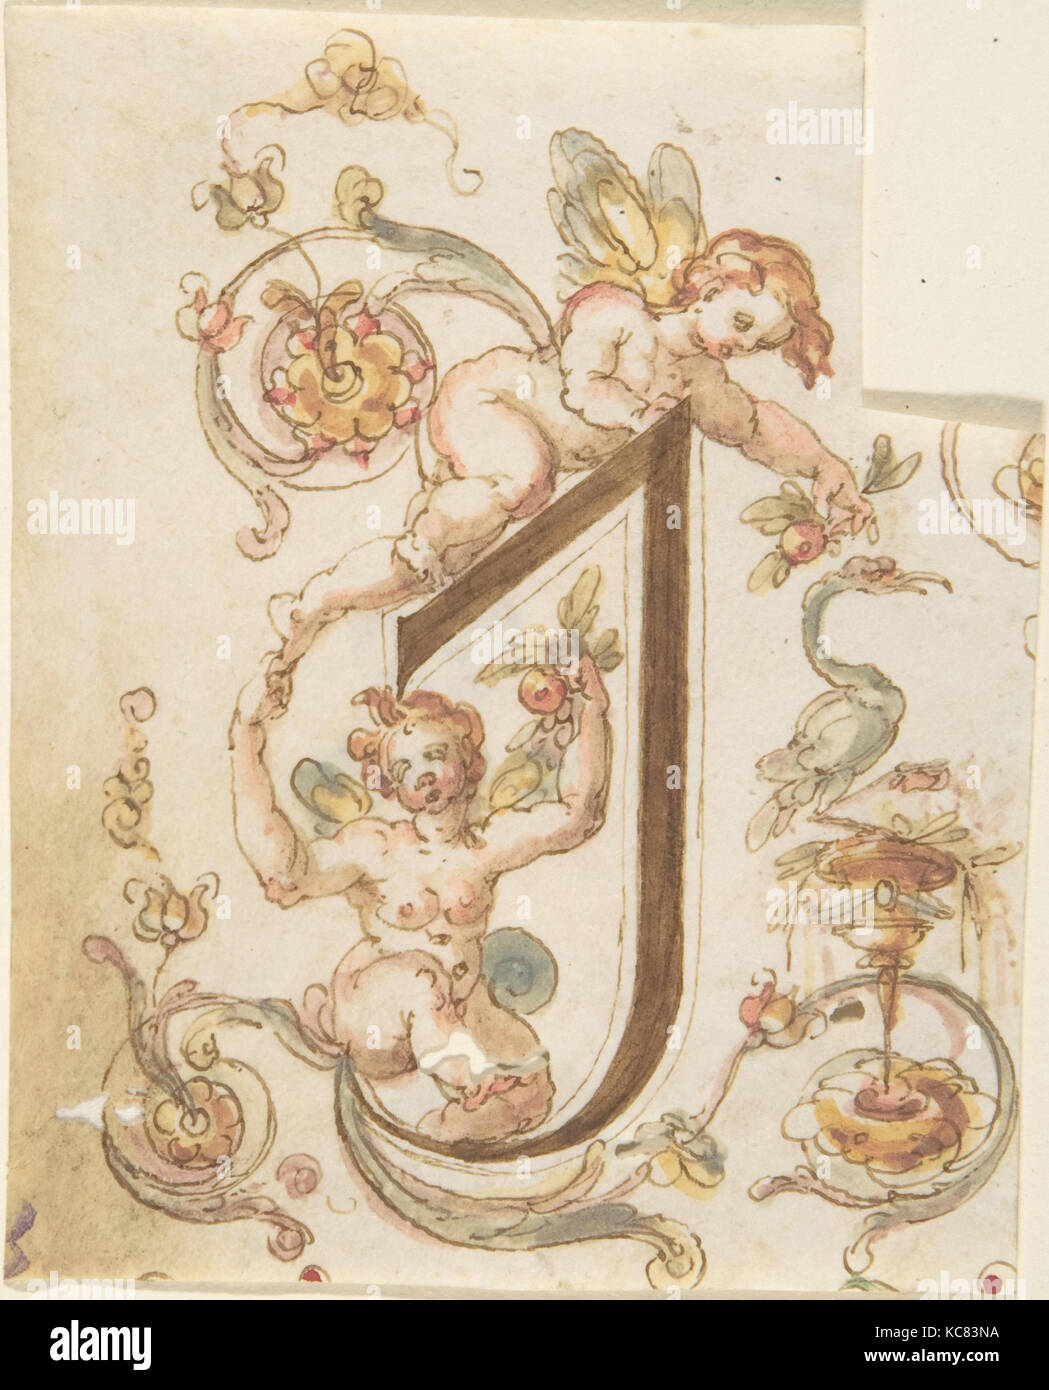 Decorative Letter 'I' with Putti (Embroidery Design?), Anonymous, Italian, 16th century Stock Photo